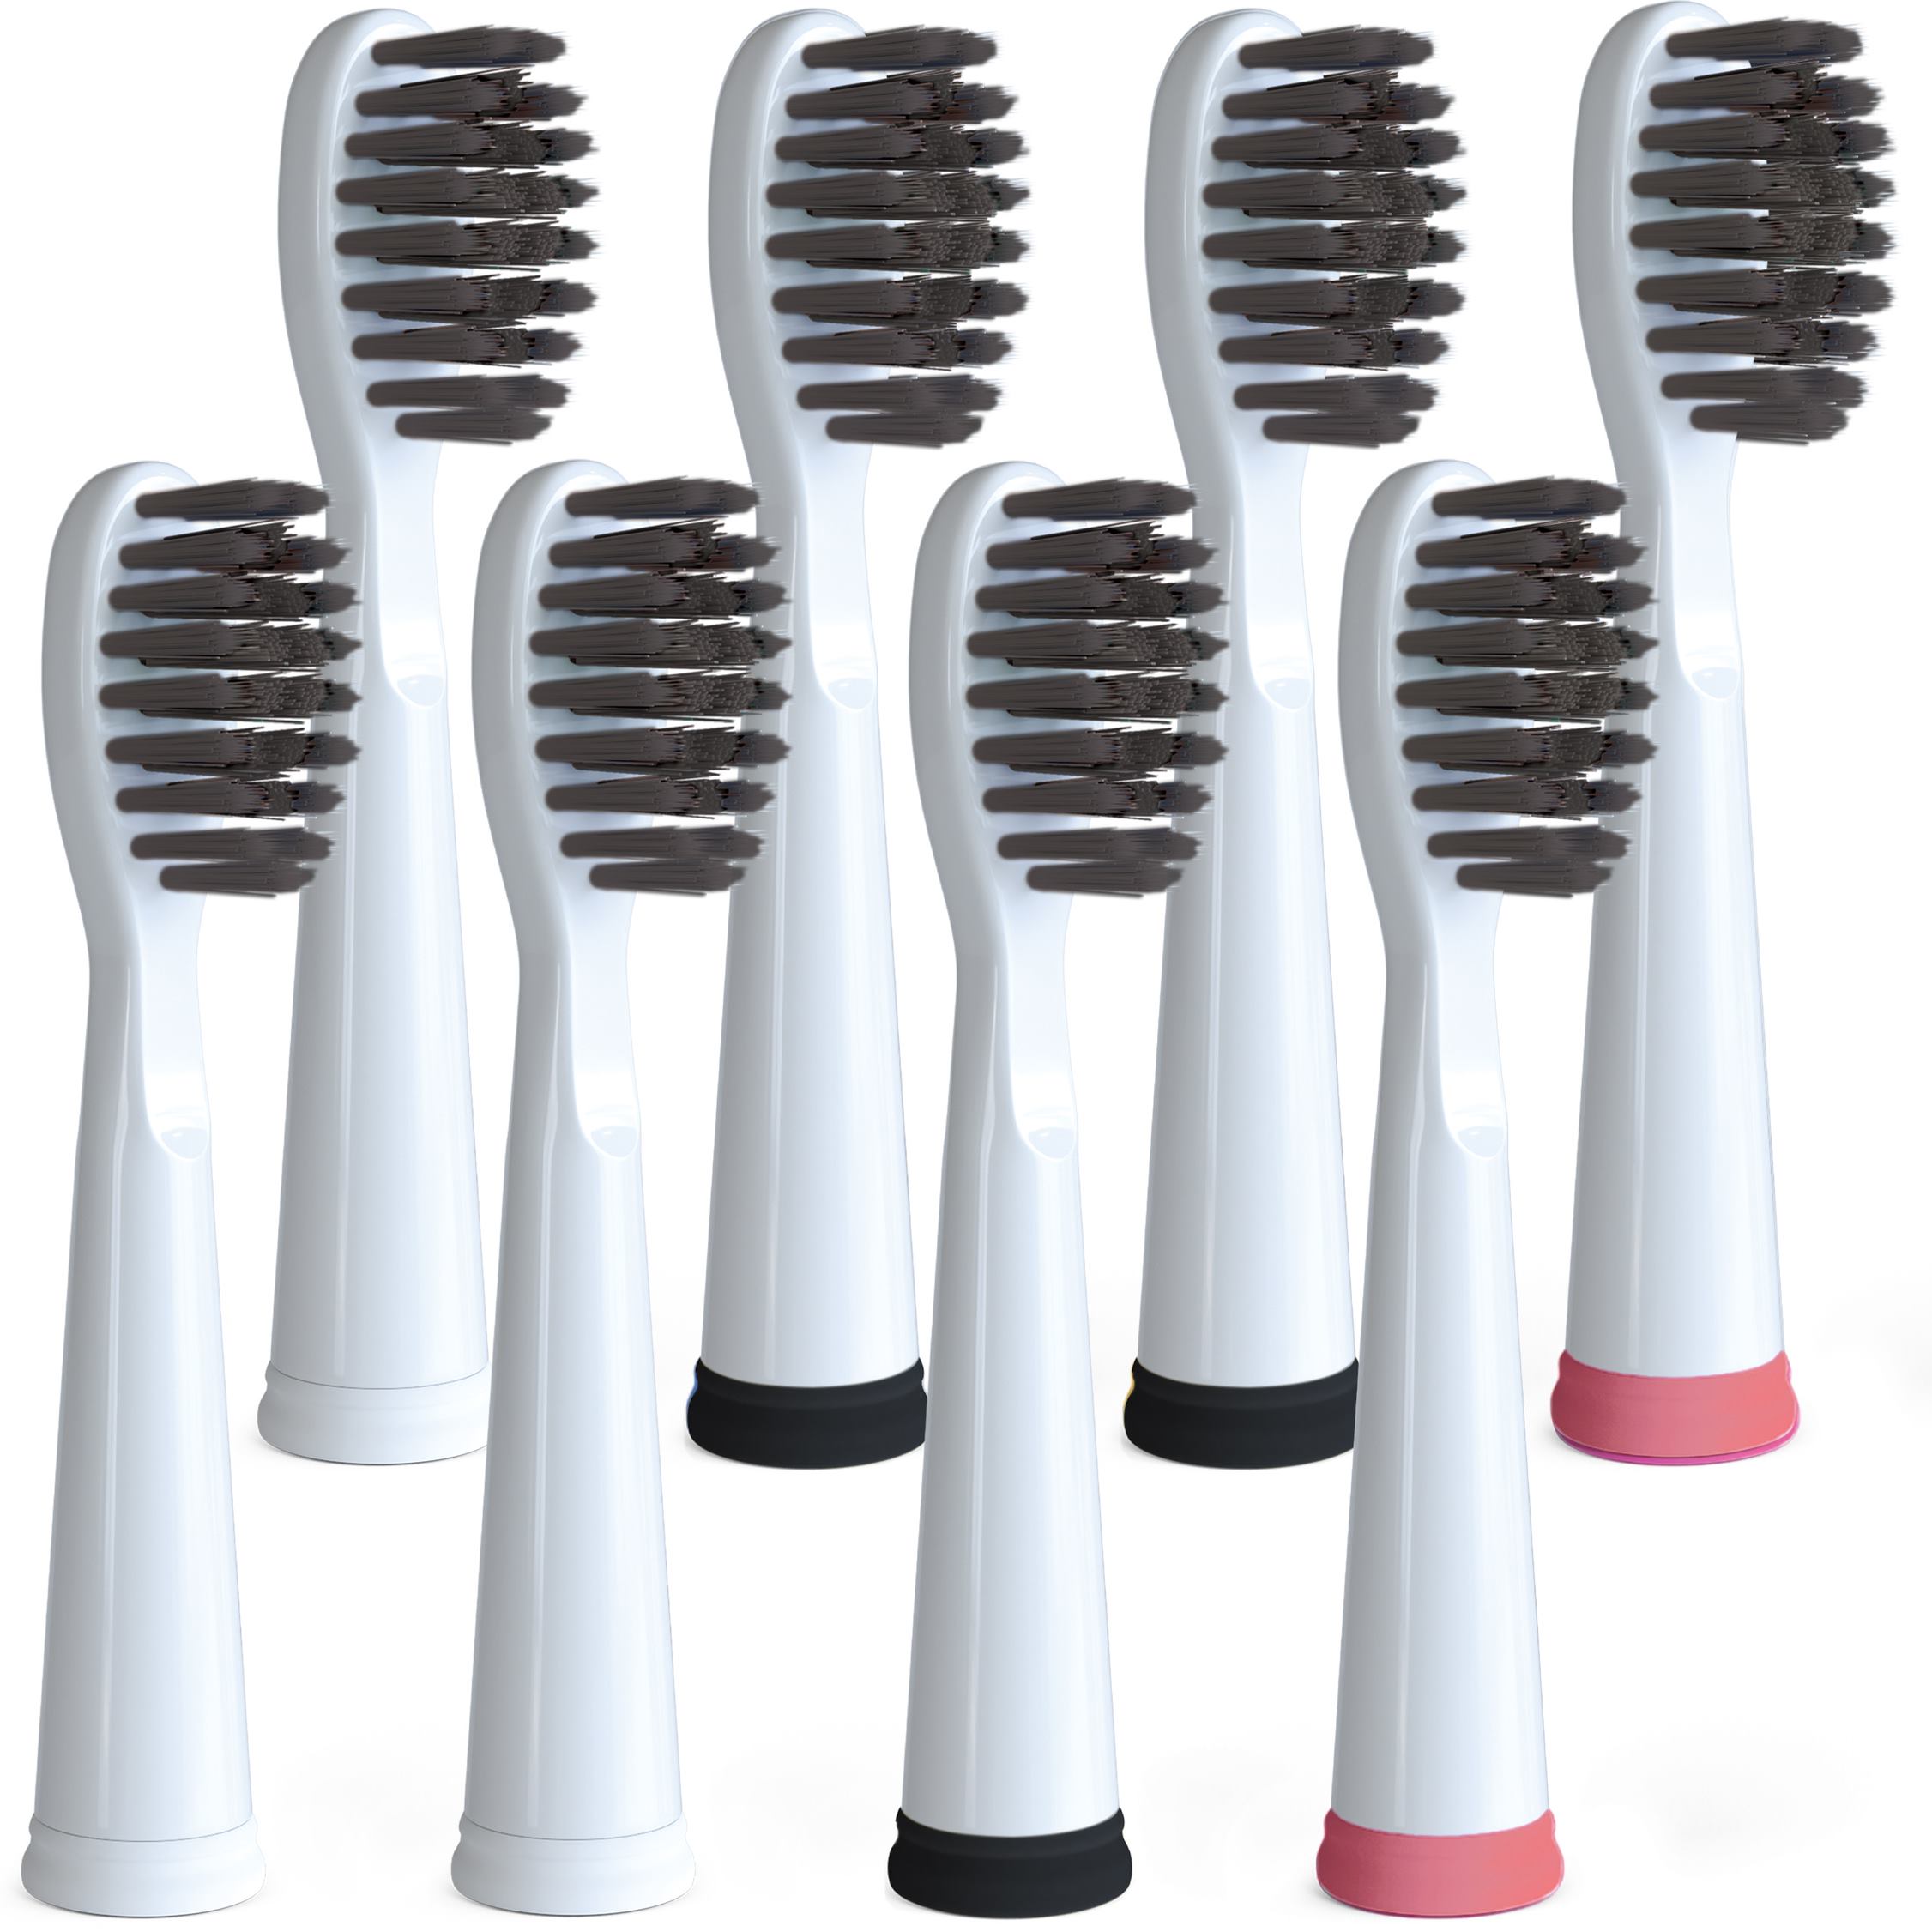 Sonic-FX Charcoal Replacement Brush Heads (8-Pack) | Snapwhite